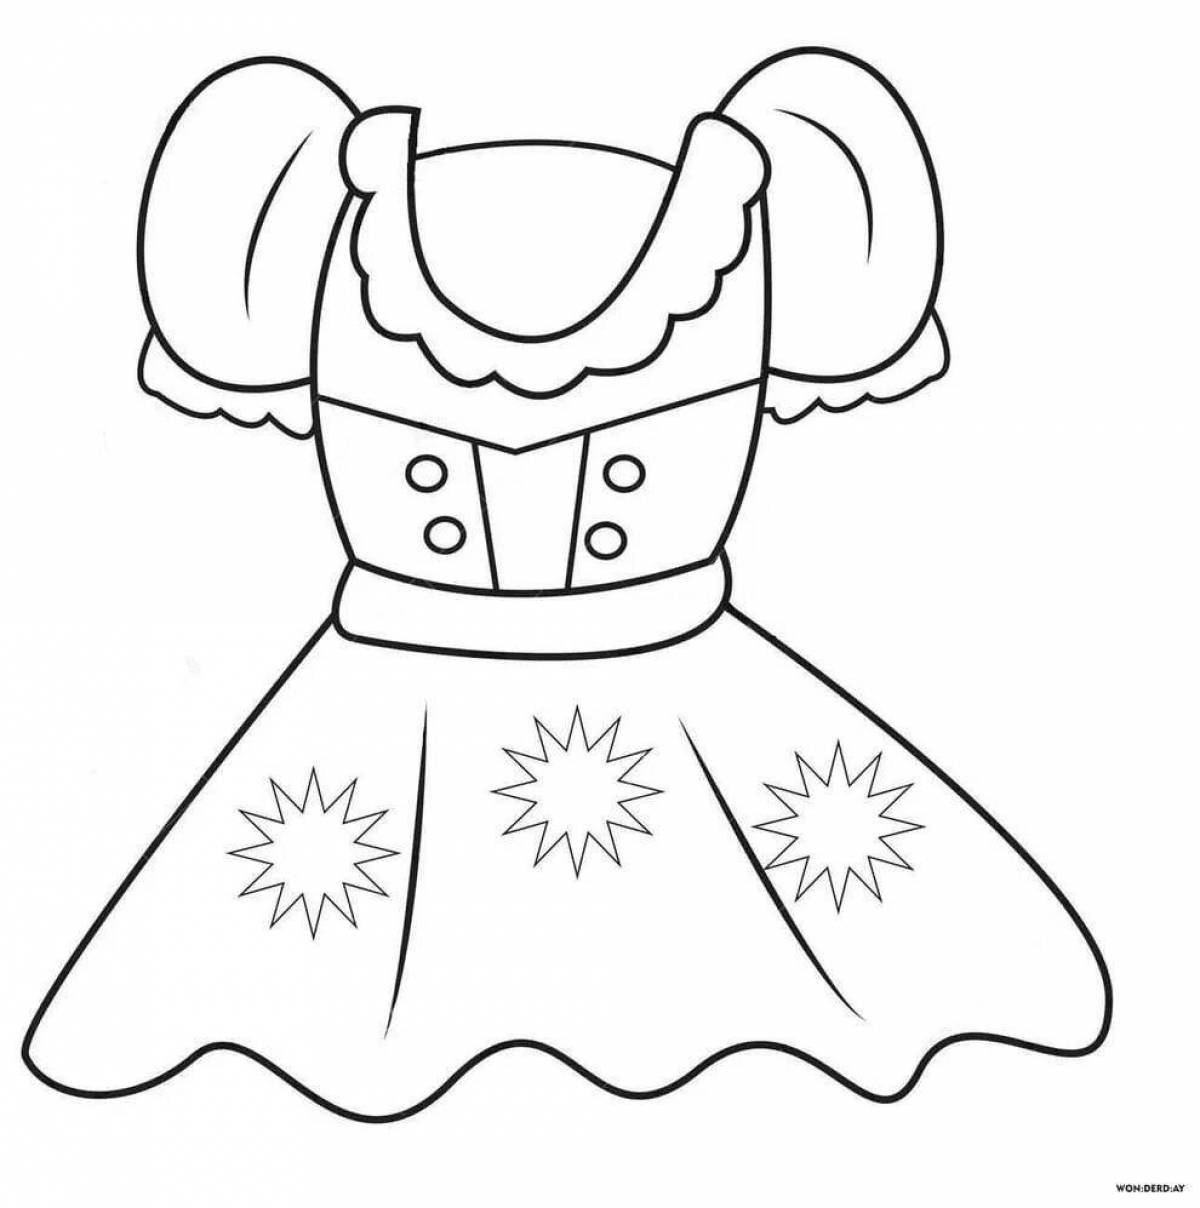 Coloring book funny doll dress for children 3-4 years old